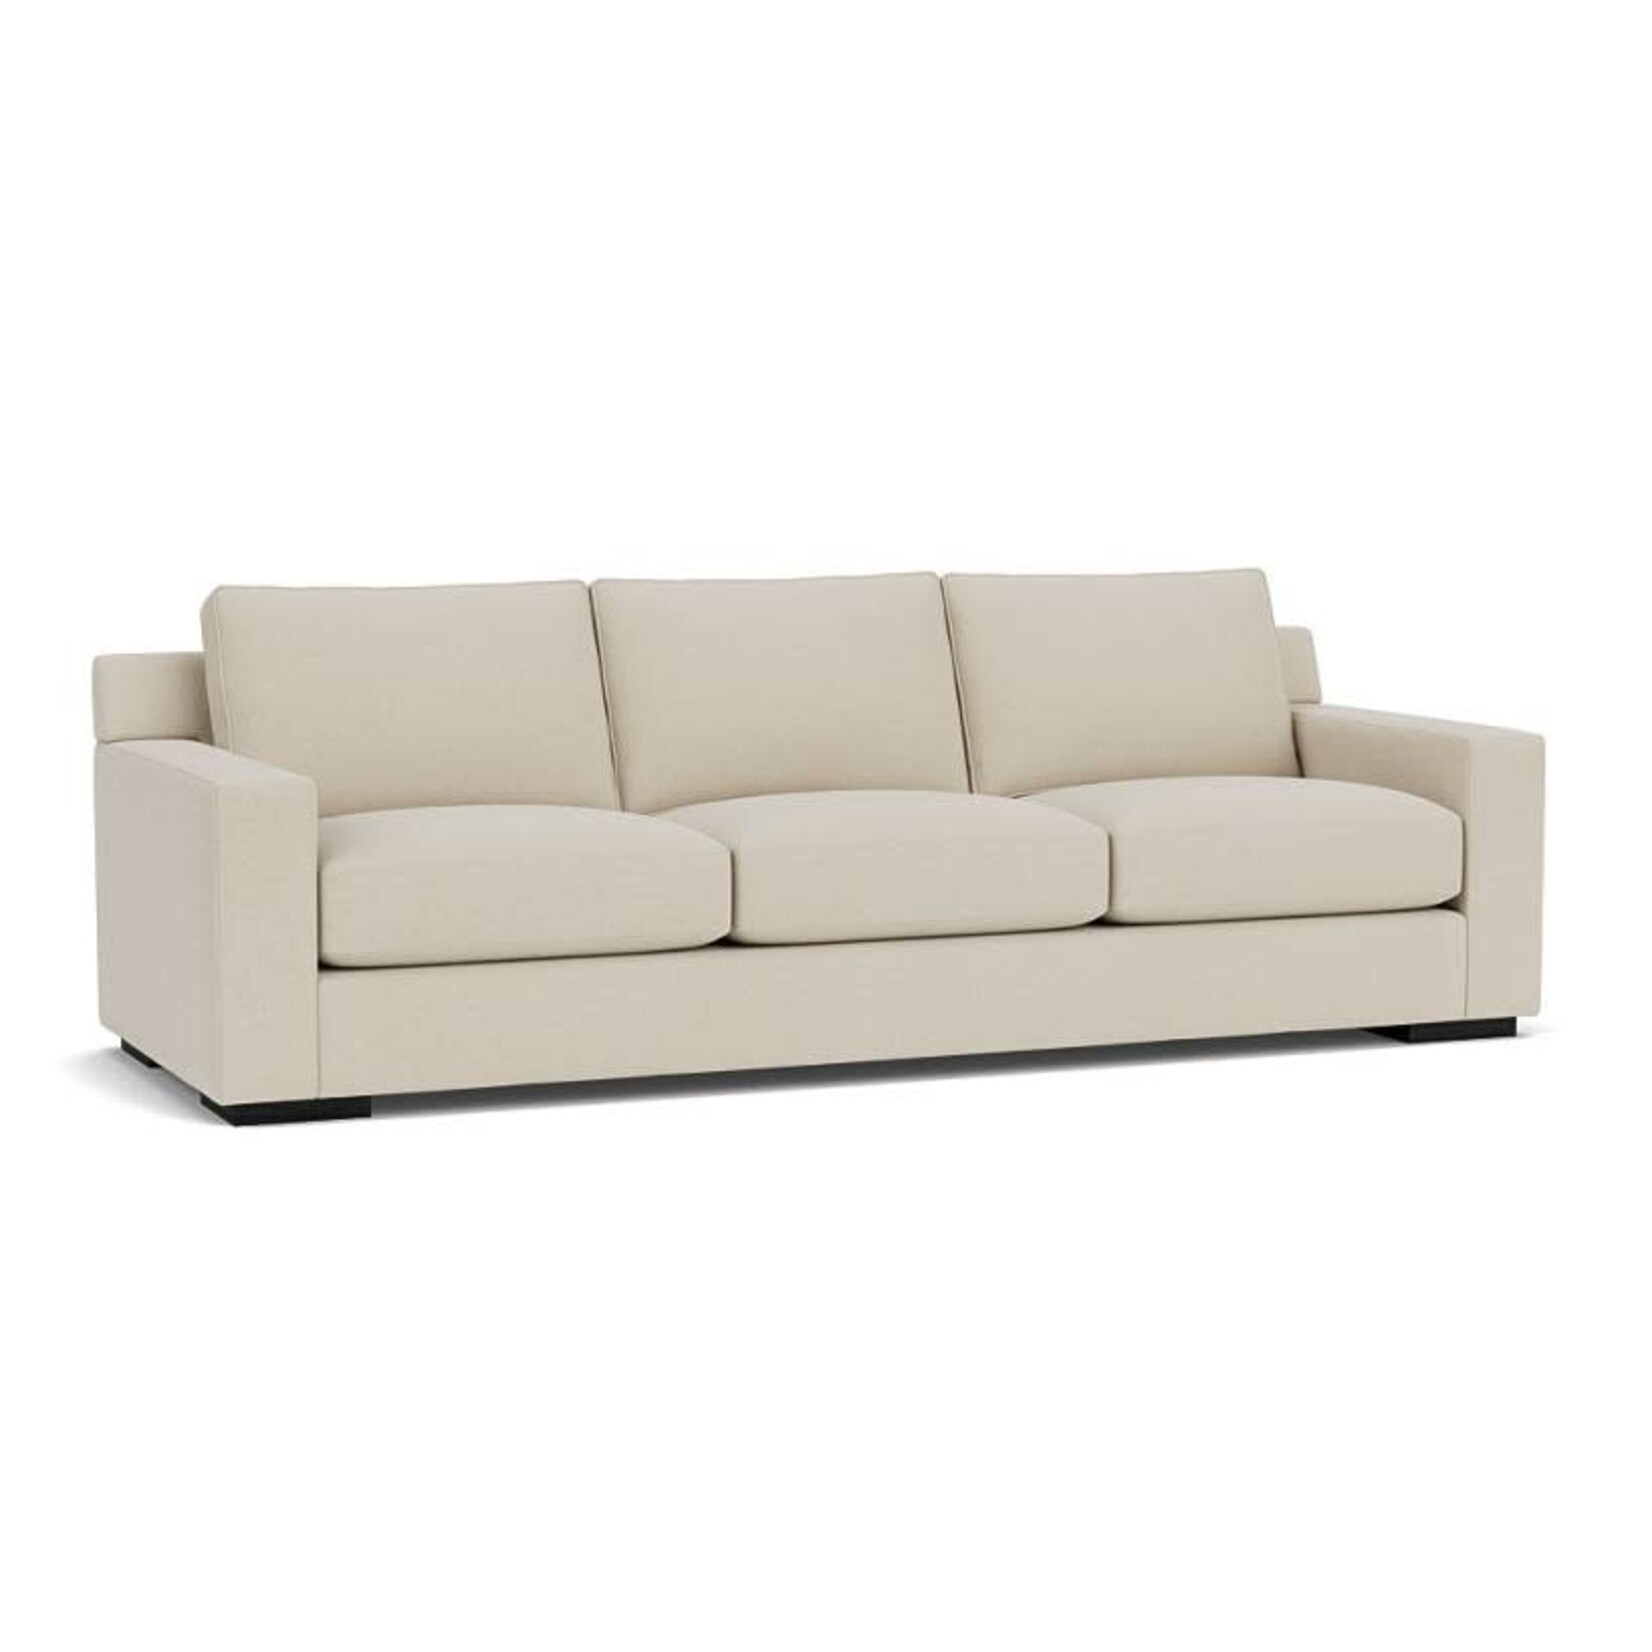 Outside The Box 99x39x33 Gabby Breezy Linen Tailored Lab Relaxed Upholstered Sofa